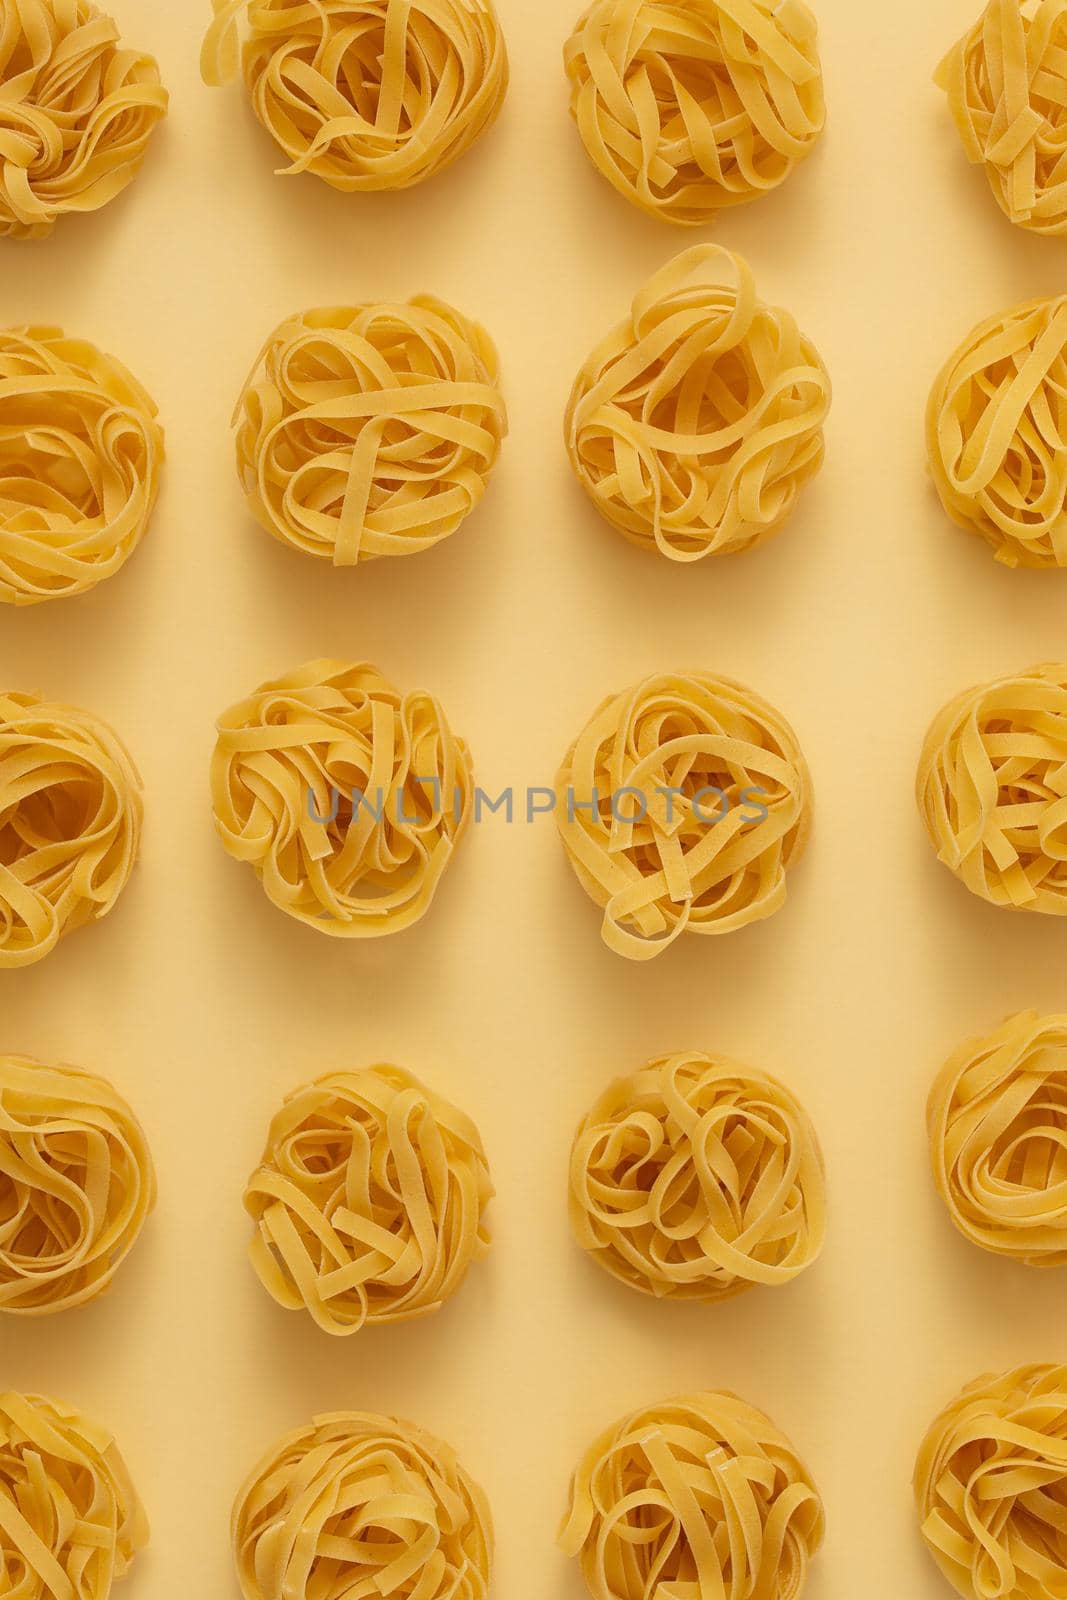 Minimal food pattern made of pasta tagliatelle on light yellow pastel background. Close up of traditional Italian pasta in pop art style. Pasta, Italian cuisine concept. Top view, flat lay